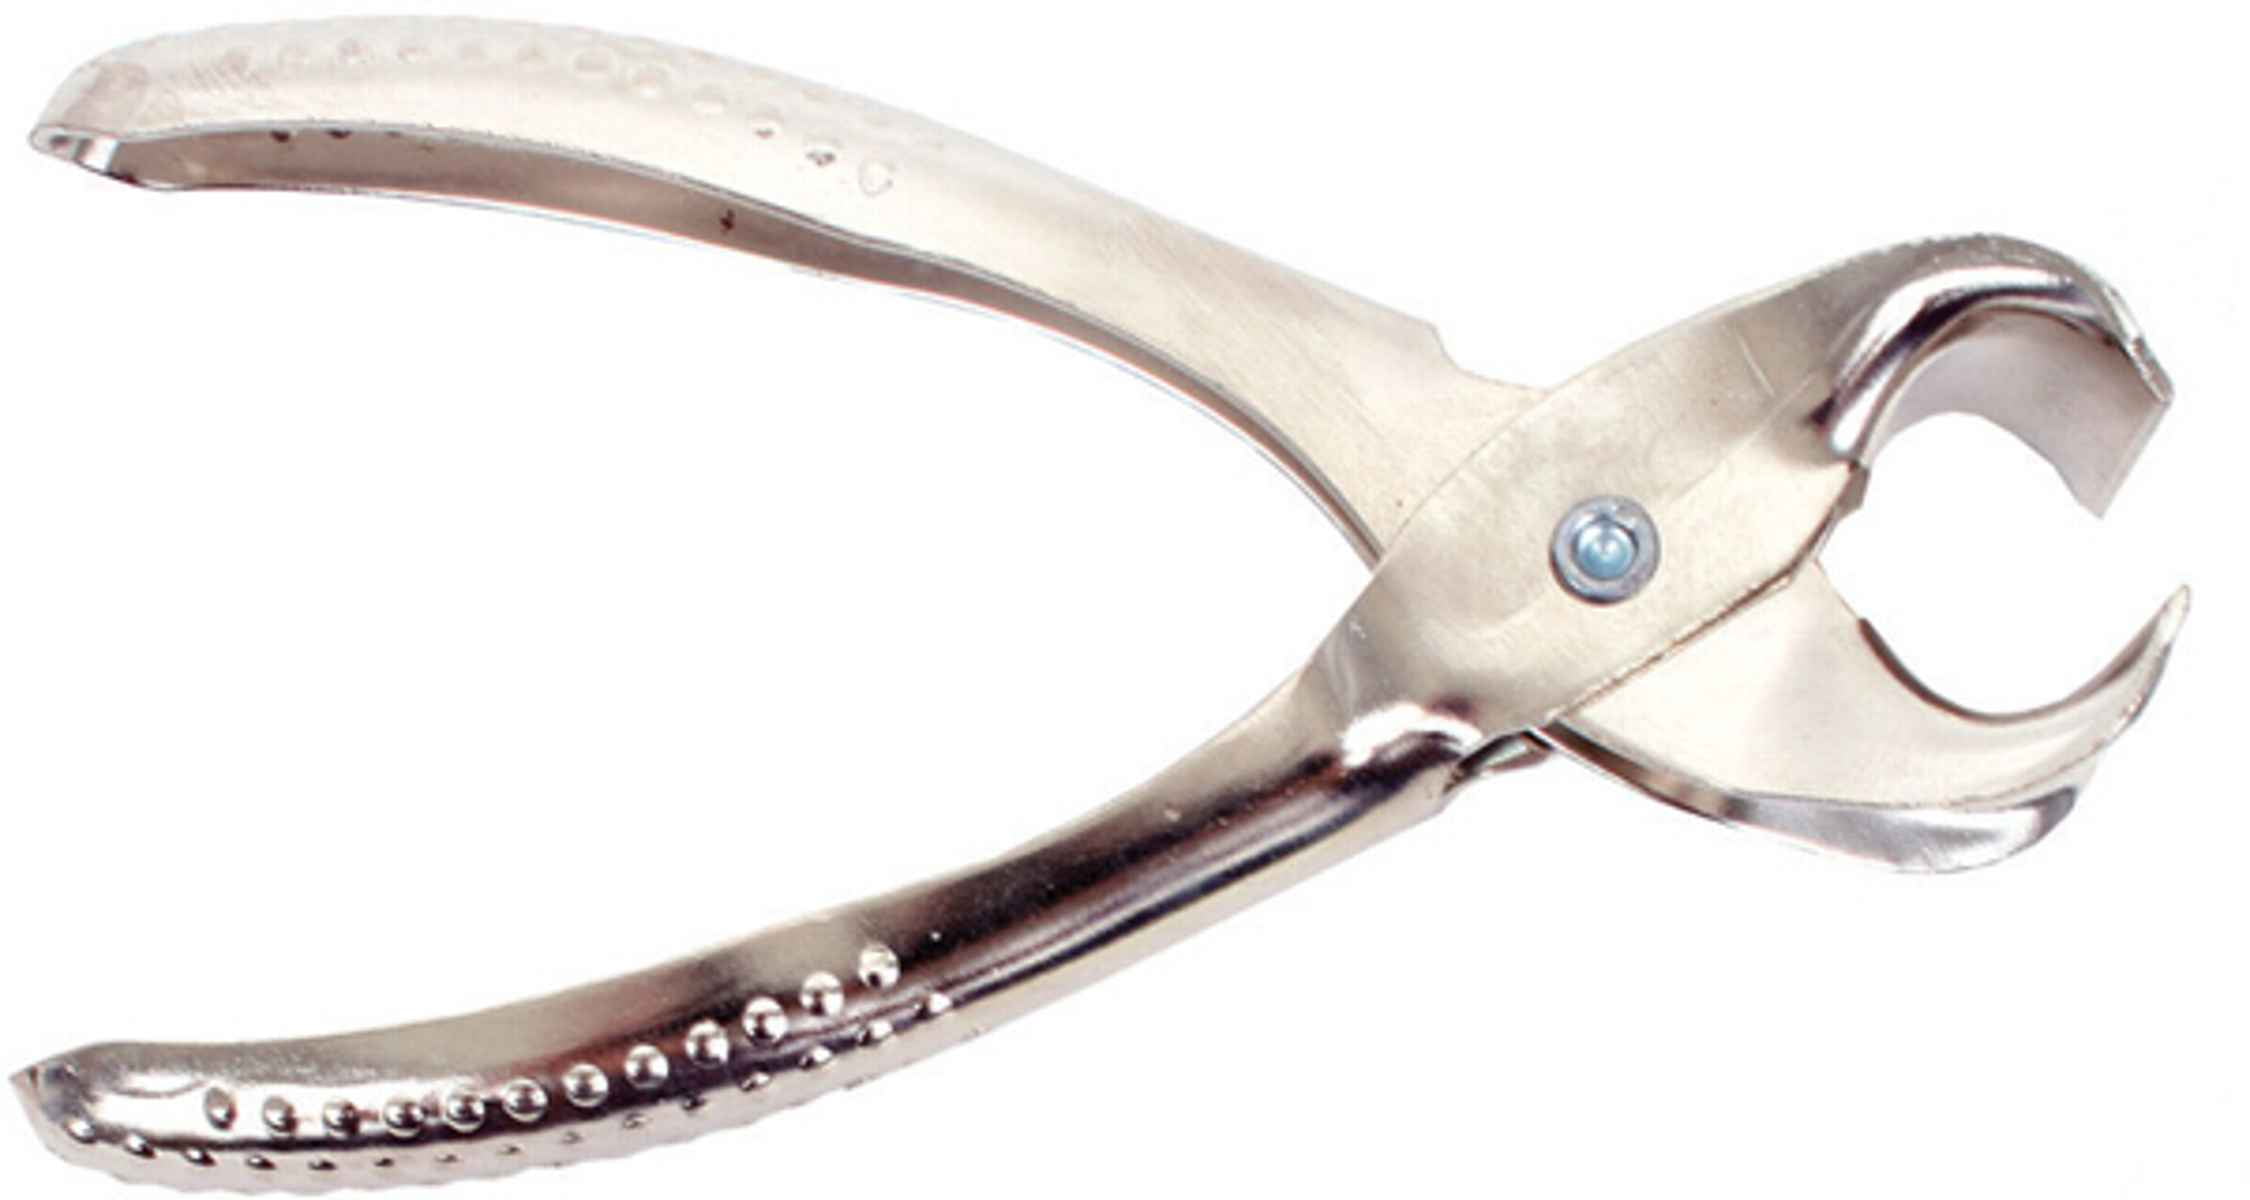 CRAPPIE POLE PINCHER MAYBRUN'S COMMERCIAL CATFISH SKINNER PLIERS 03103 